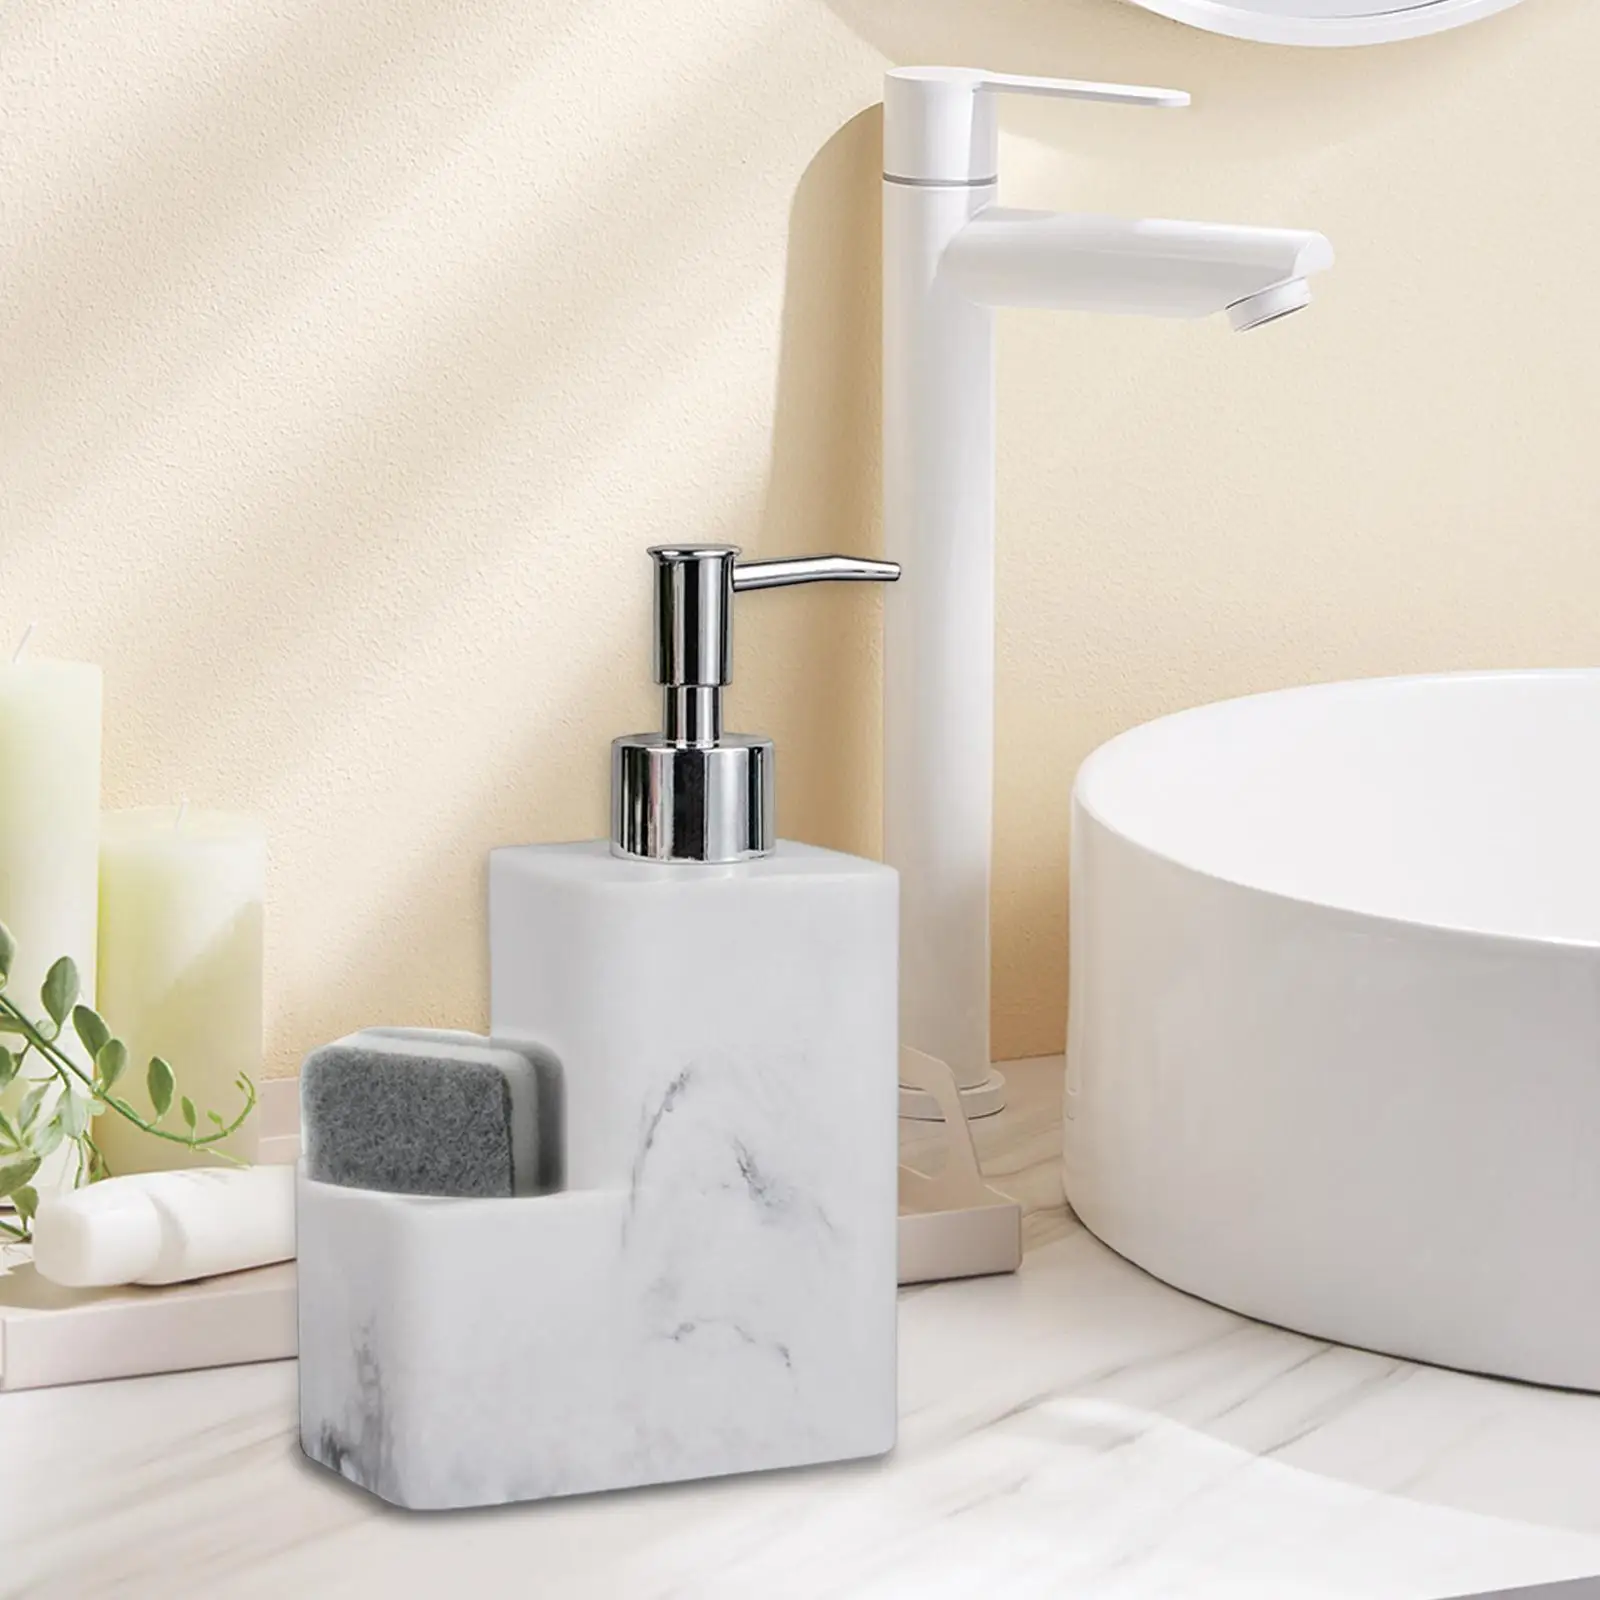 Refillable 350ml Dish Soap Dispenser Pump Bottle Marble Surface,Organizer Holder Stores Scrubbers for Countertop